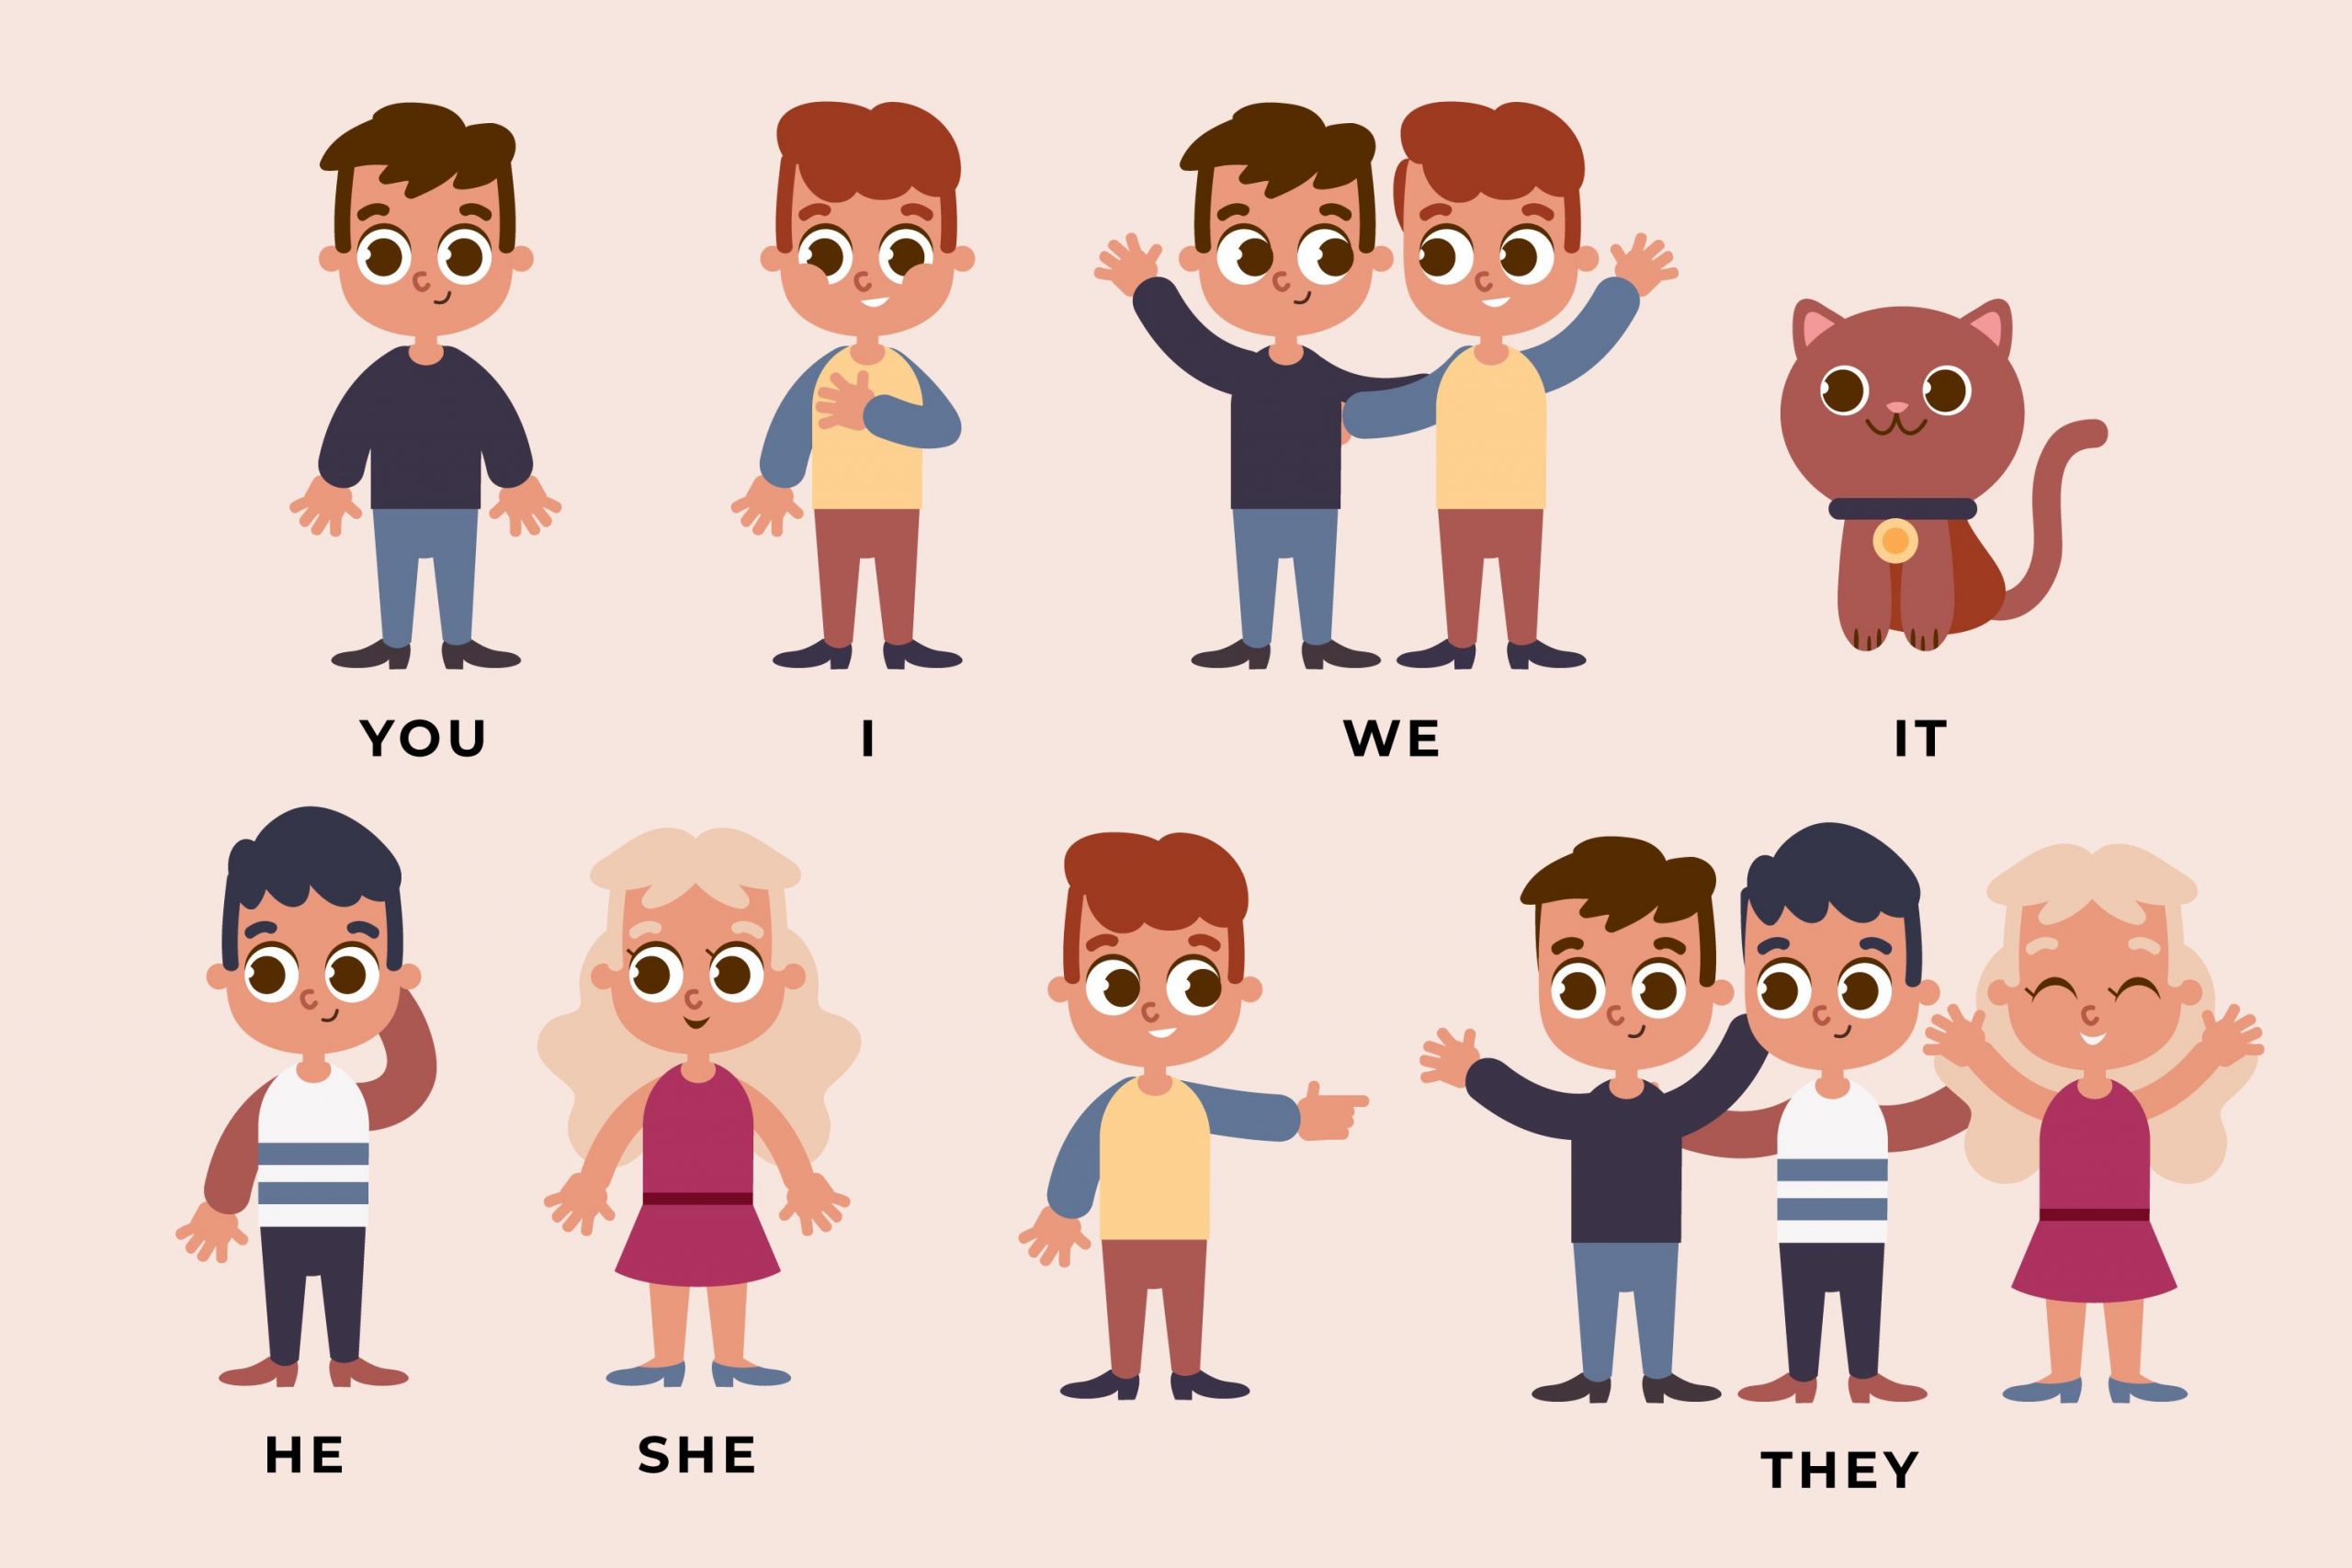 i-you-he-she-it-and-they-are-called-personal-pronouns